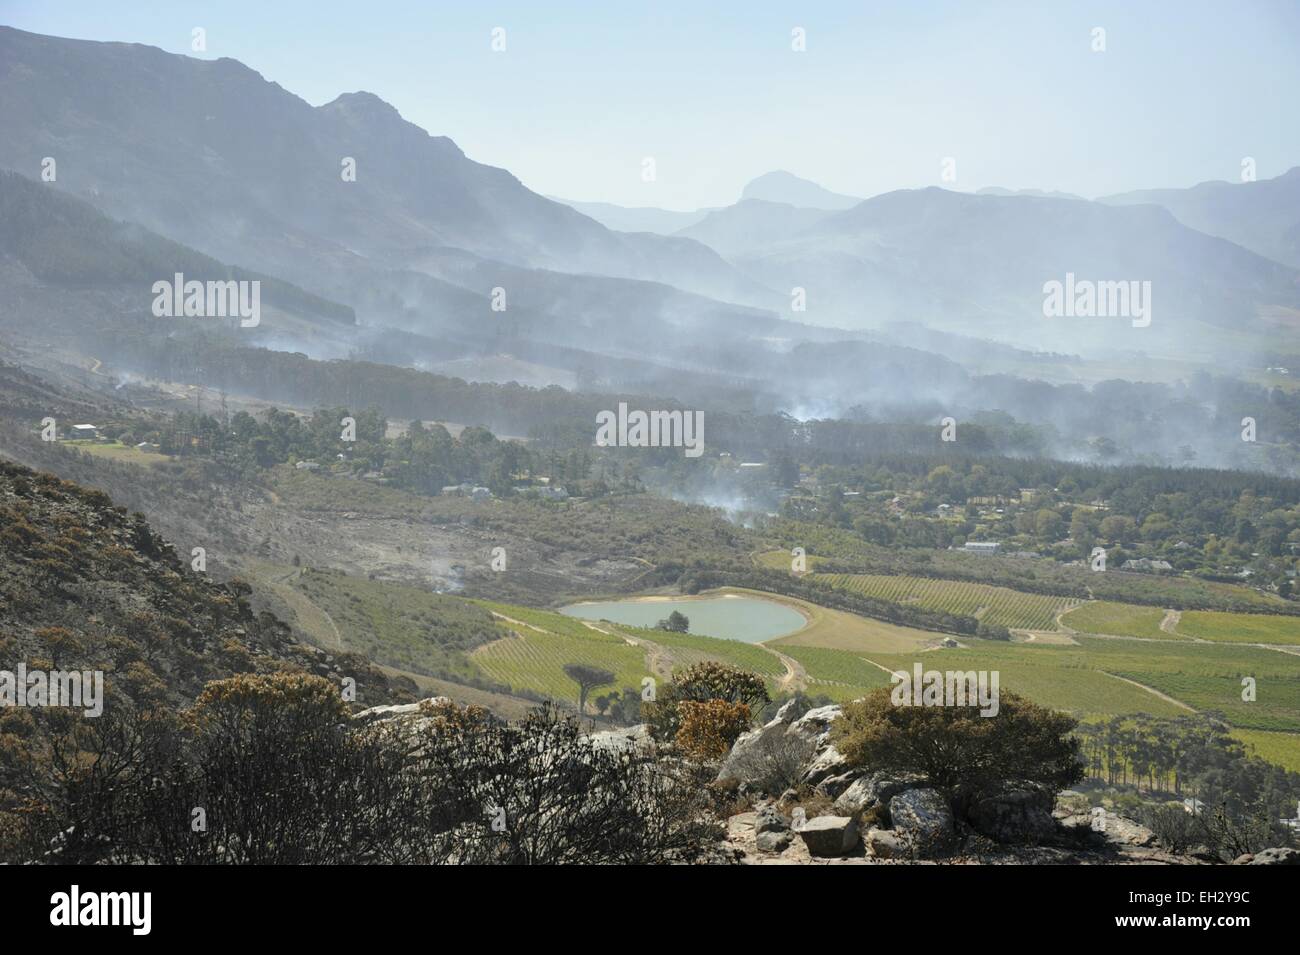 Cape Town, South Africa. 5th March, 2015. Fires still smouldering around Constantia and Tokai viewed from Silvermine on Ou Kaapse Weg after five days of wild fires that have destroyed thousands of hectares of land on the Cape Peninsula south of Table Mountain.  The fires stretched across the mountain from Muizenburg in the east over to Hout Bay and Fishhoek in the west. Strong winds have been hampering efforts to contain the fires. Credit:  STUART WALKER/Alamy Live News Stock Photo